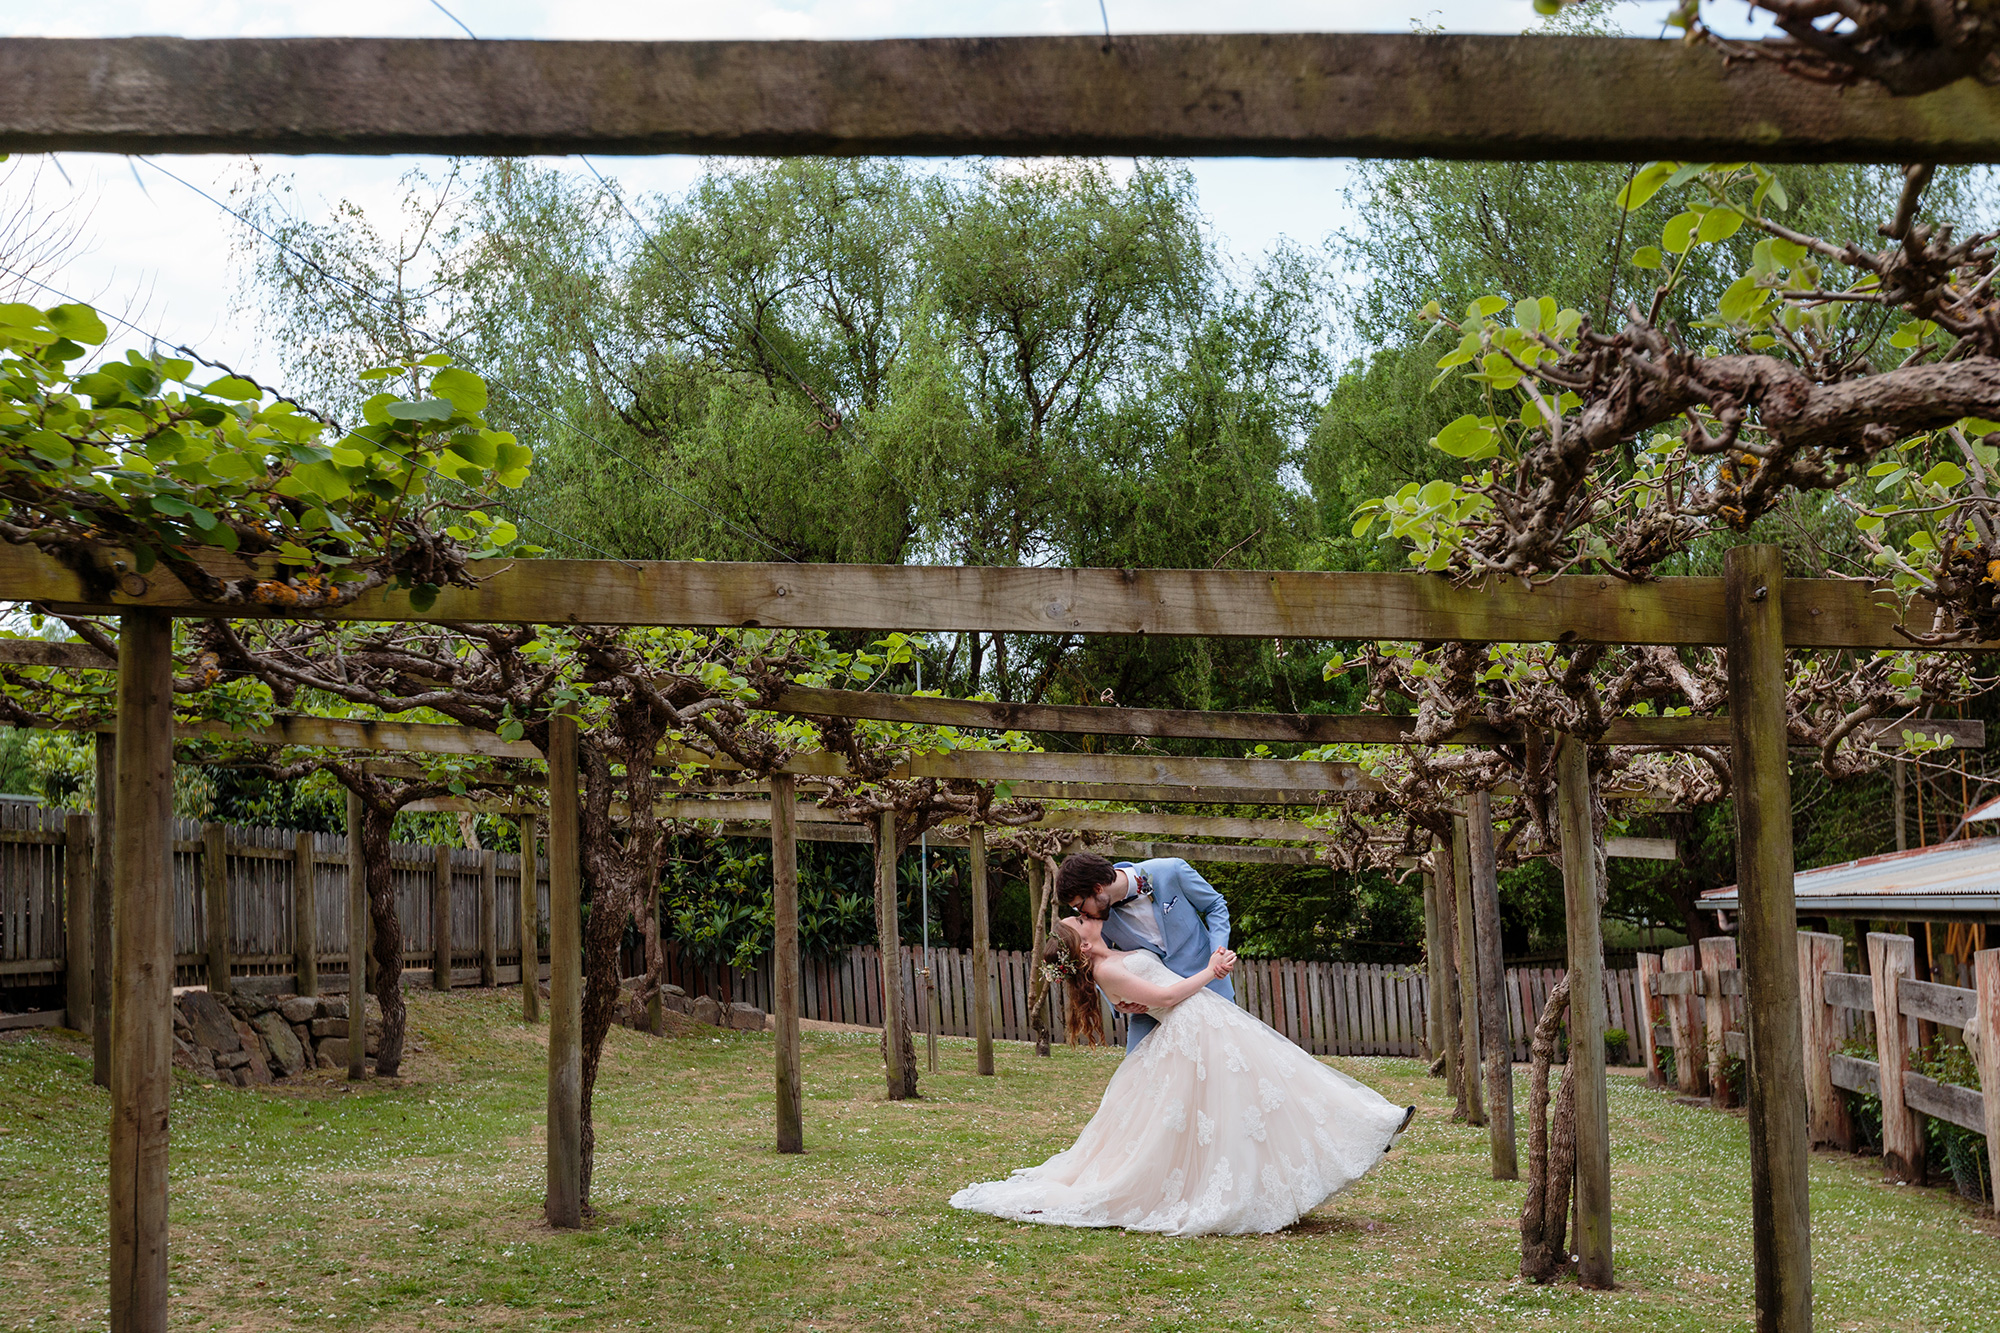 Stacey_Andrew_Rustic-Farm-Wedding_Alan-Rogers-Photography_042